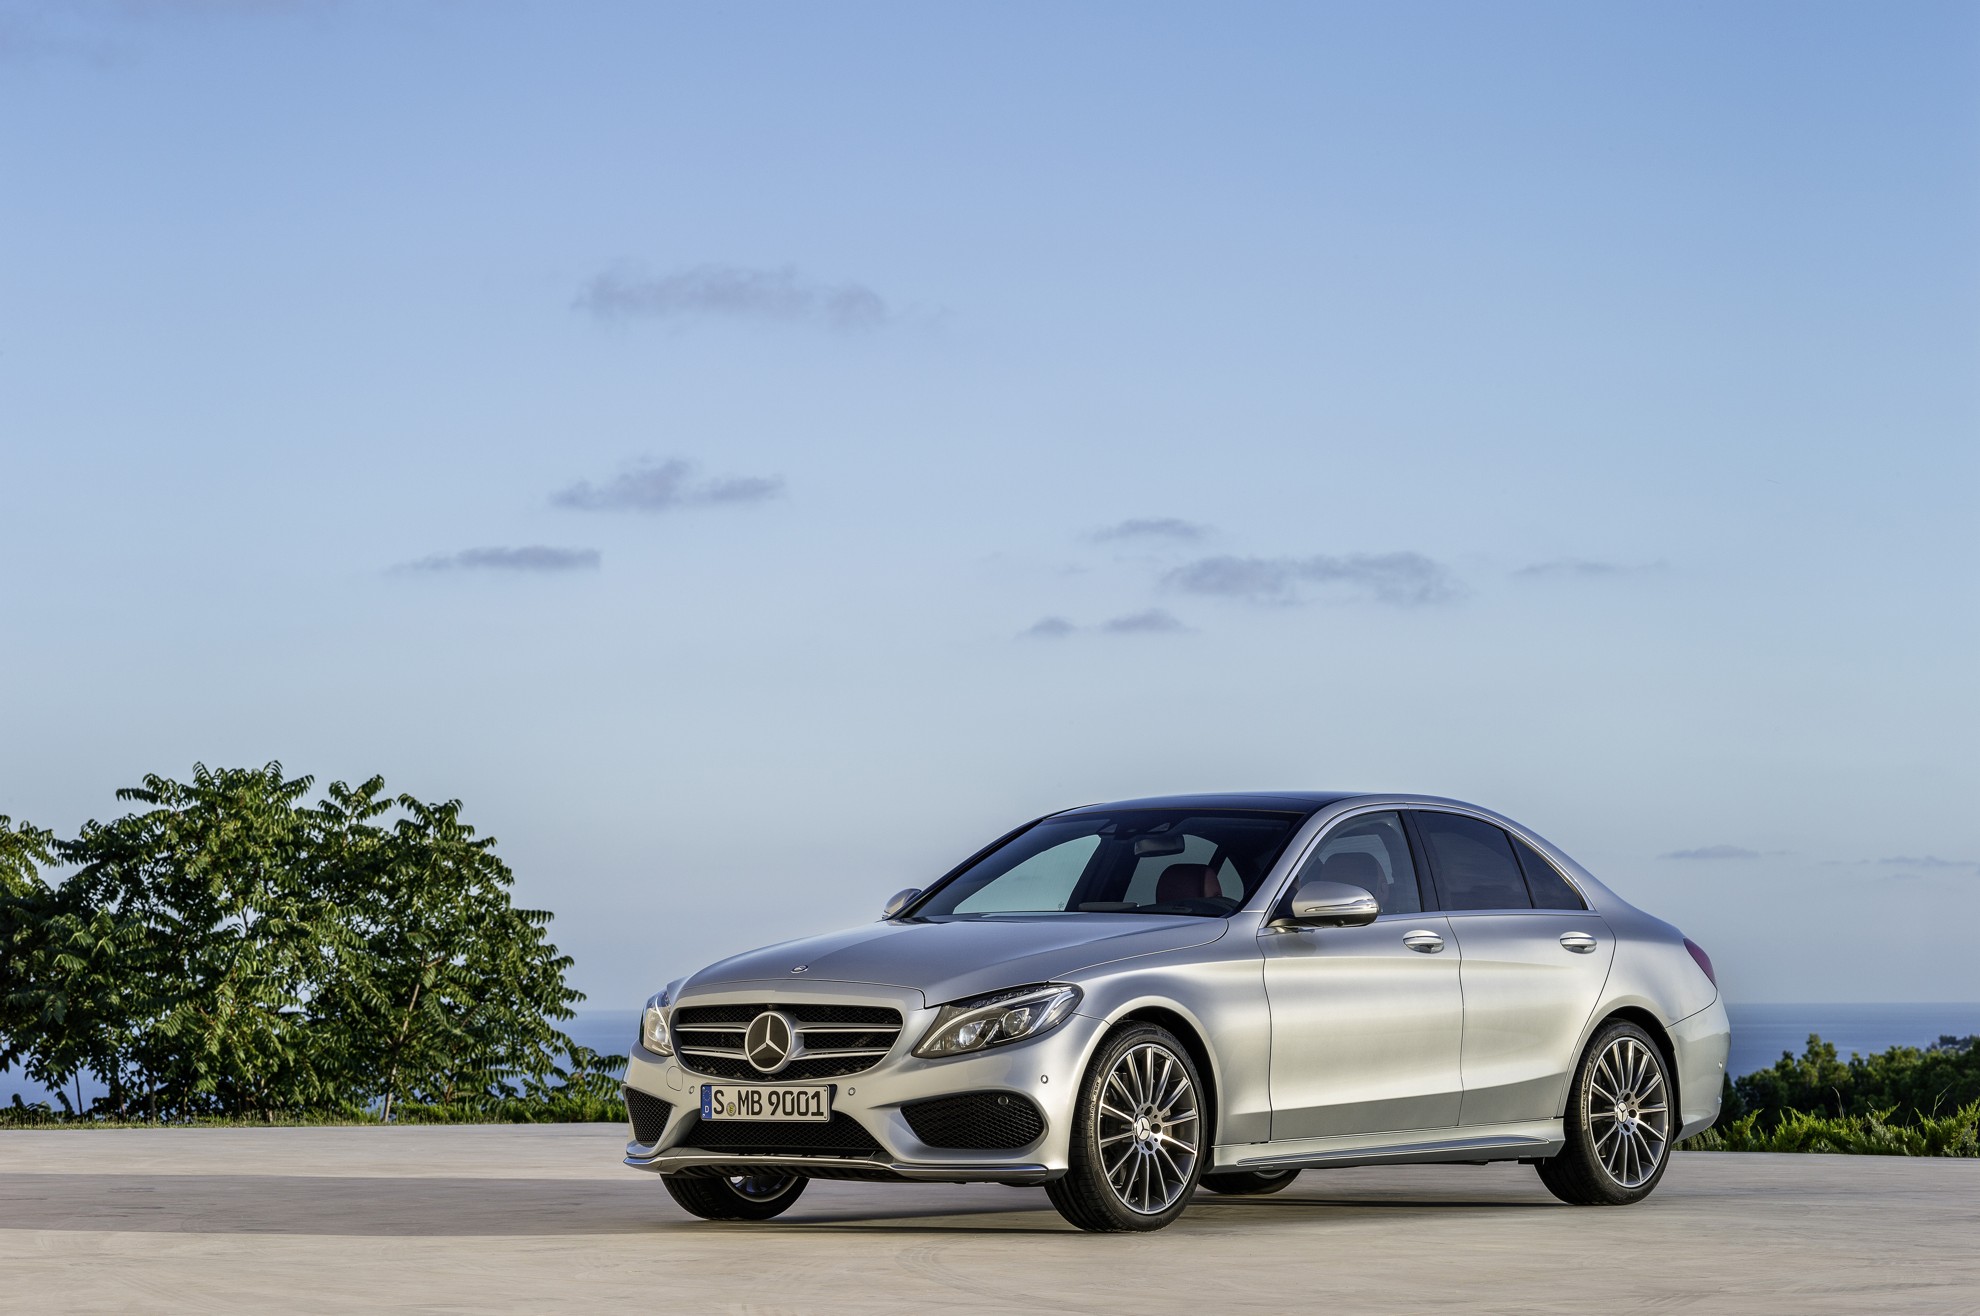 Mercedes-Benz to Launch Two Models this weekend in Germany